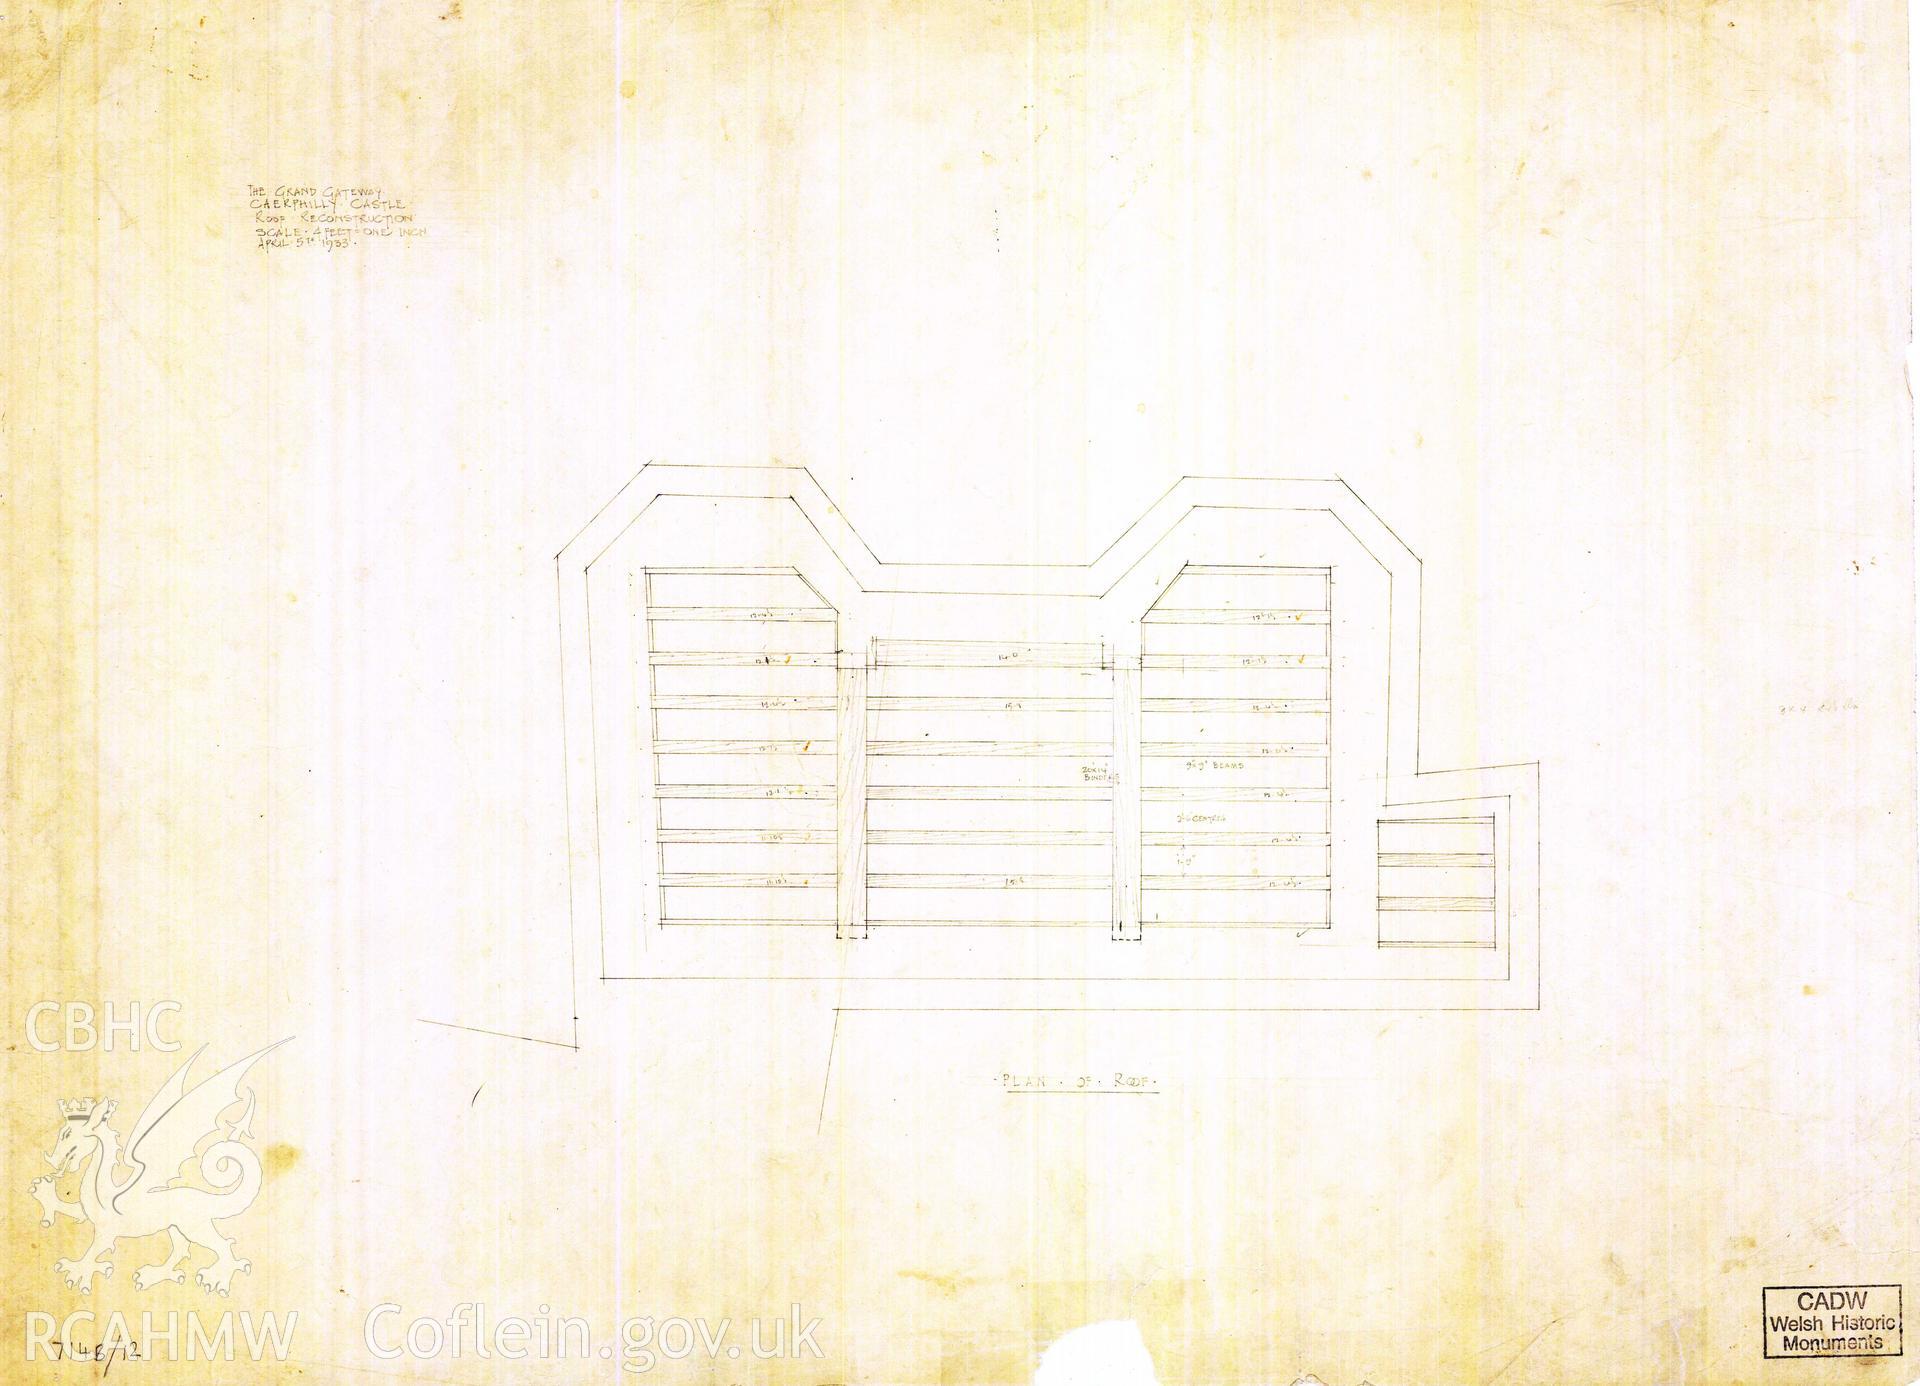 Cadw guardianship monument drawing of Caerphilly Castle. Outer E gate, roof beams plan (i). Cadw ref. no: 714B/12. Scale 1:48. Original drawing withdrawn and returned to Cadw at their request.